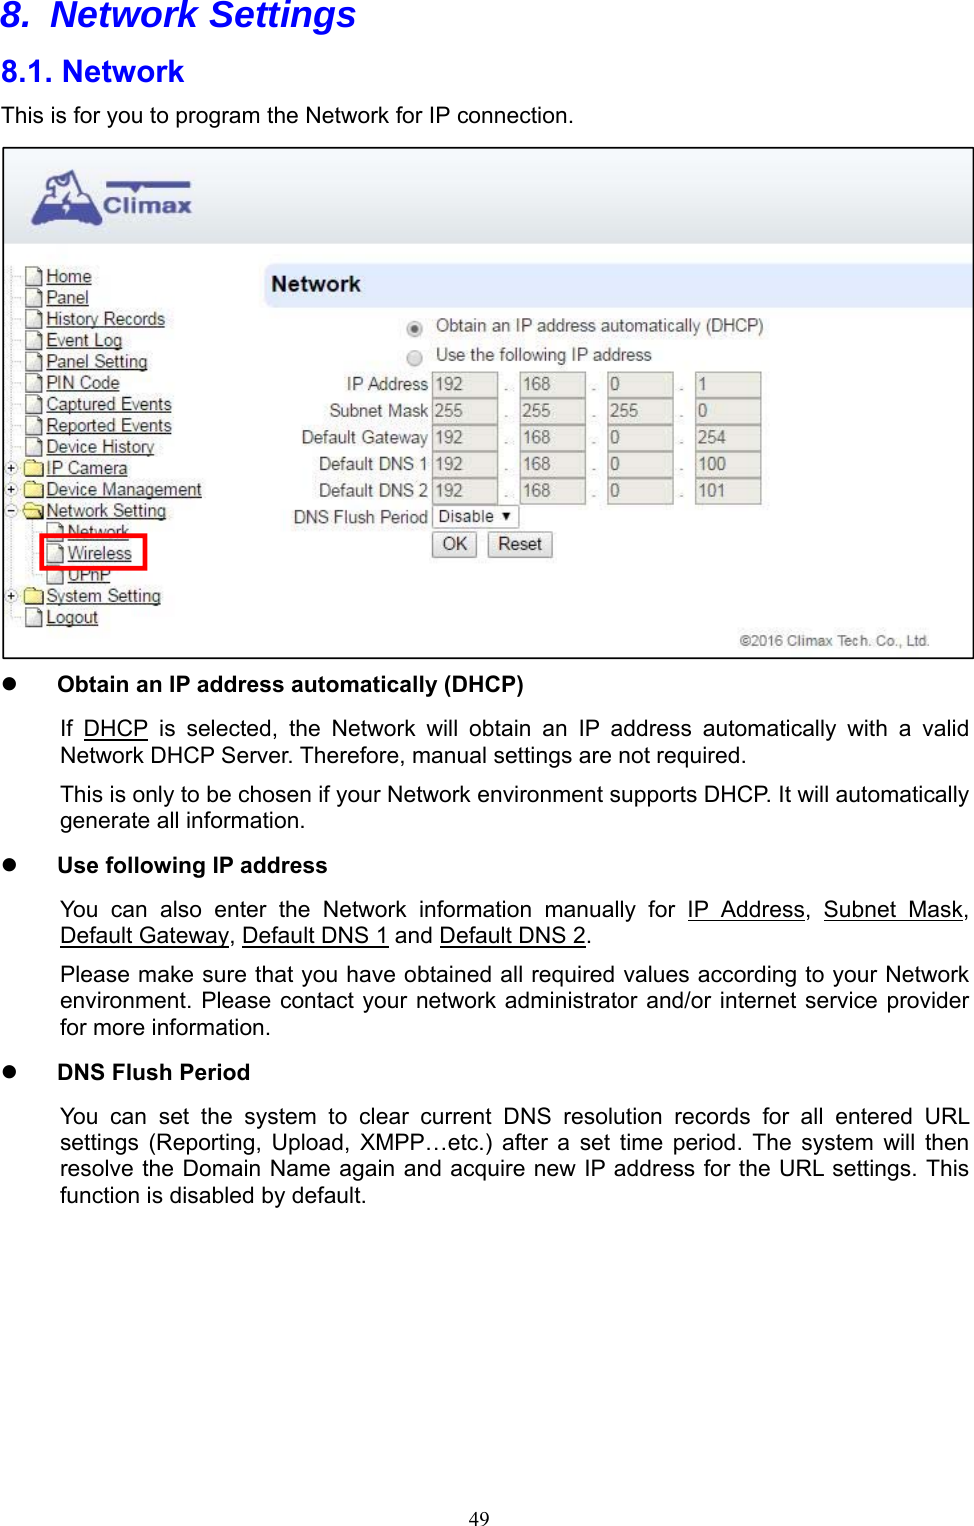  498. Network Settings  8.1. Network   This is for you to program the Network for IP connection.     Obtain an IP address automatically (DHCP) If  DHCP  is  selected,  the  Network  will  obtain  an  IP  address  automatically  with  a  valid Network DHCP Server. Therefore, manual settings are not required. This is only to be chosen if your Network environment supports DHCP. It will automatically generate all information.  Use following IP address You  can  also  enter  the  Network  information  manually  for  IP  Address,  Subnet  Mask, Default Gateway, Default DNS 1 and Default DNS 2. Please make sure that you have obtained all required values according to your Network environment. Please contact your network administrator and/or internet service provider for more information.  DNS Flush Period You  can  set  the  system  to  clear  current  DNS  resolution  records  for  all  entered  URL settings  (Reporting,  Upload,  XMPP…etc.)  after  a  set  time  period.  The  system  will  then resolve the Domain Name again and acquire new IP address for the URL settings. This function is disabled by default.    